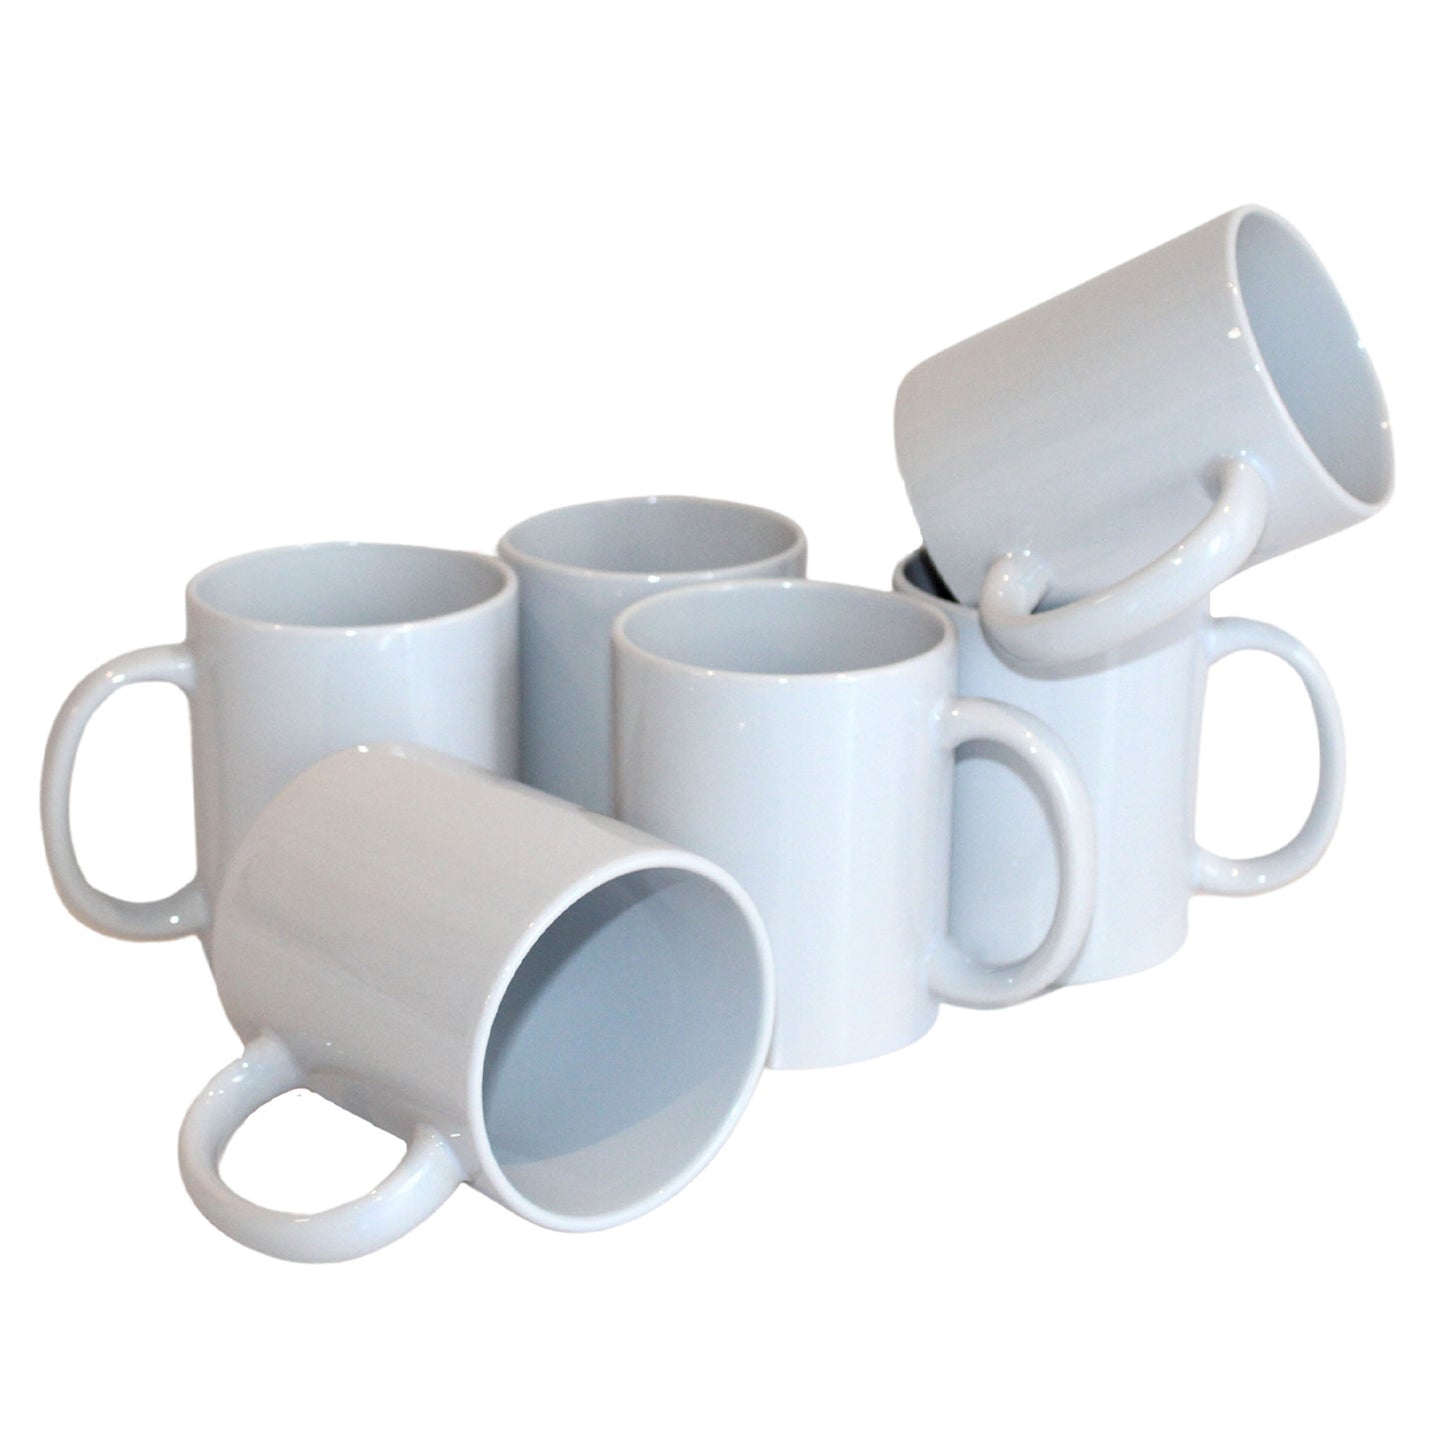 6 PACK -White 11 oz Sublimation Mugs with AAA Coating - Box of6 | Reinforced Styrofoam Packaging"